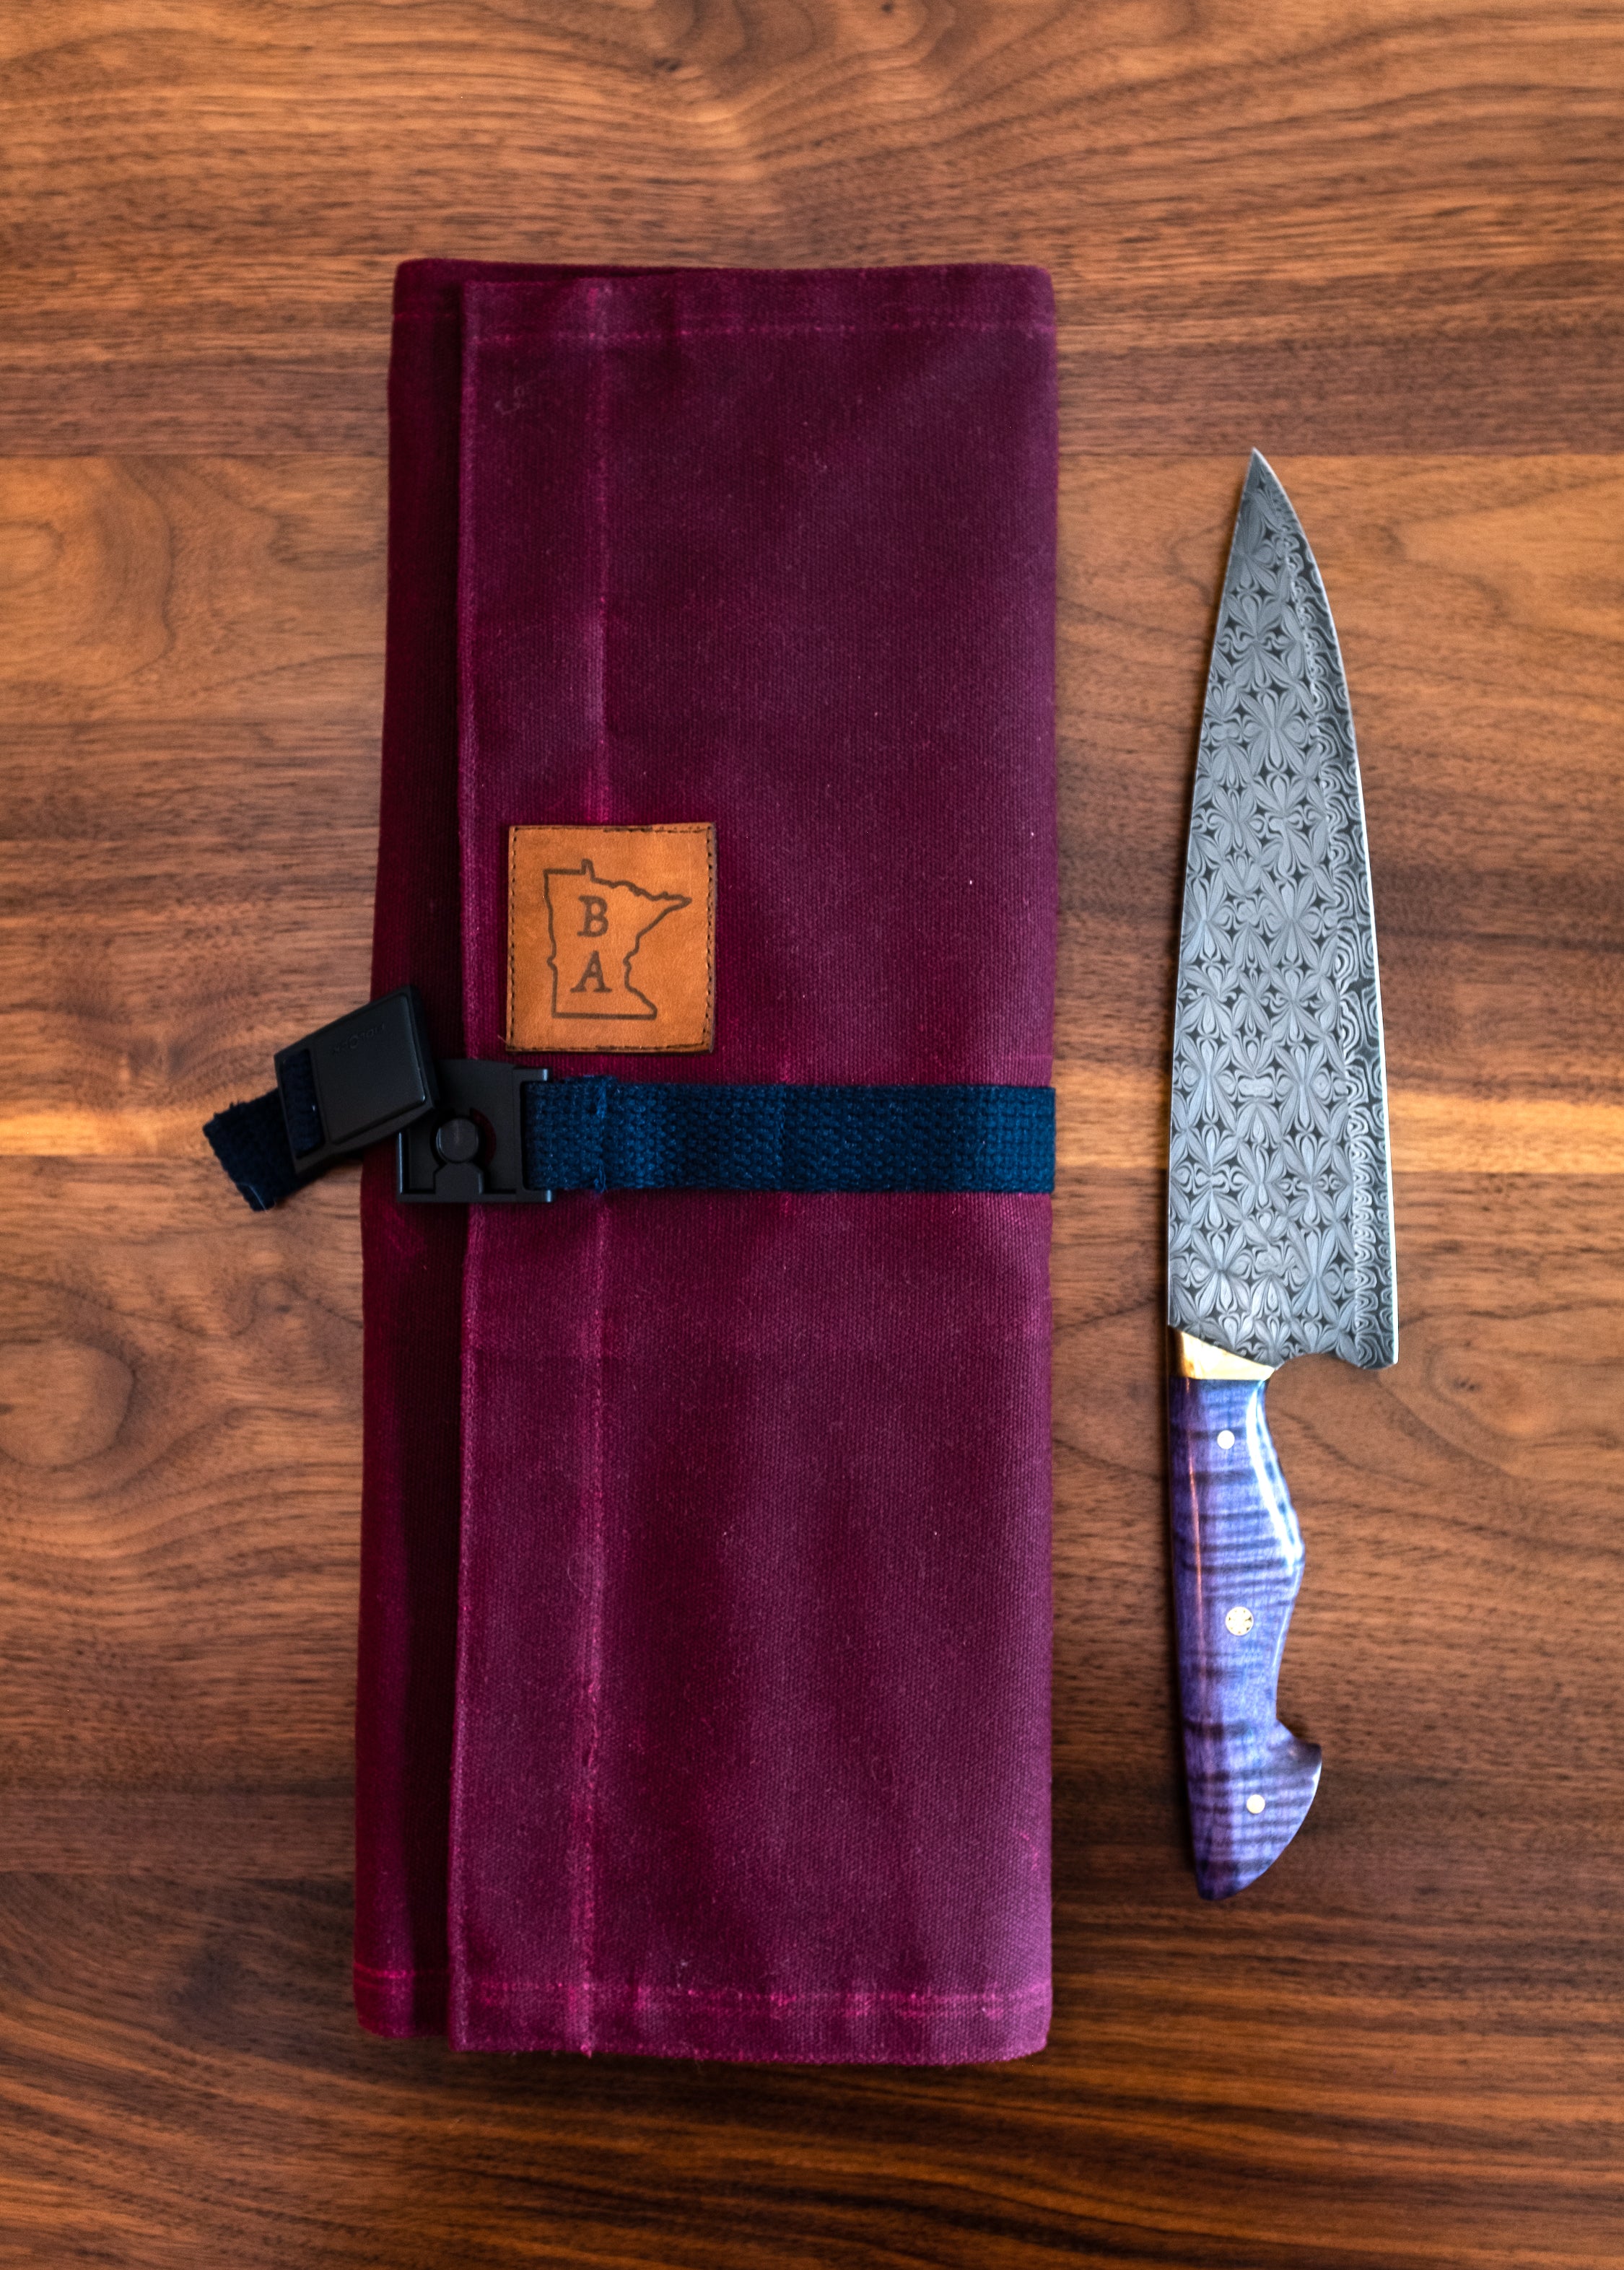 Product shot of burgundy Side Hustle knife roll buckled on a wooden surface next to knife. Handcrafted in Minnesota by Craftmade Aprons.